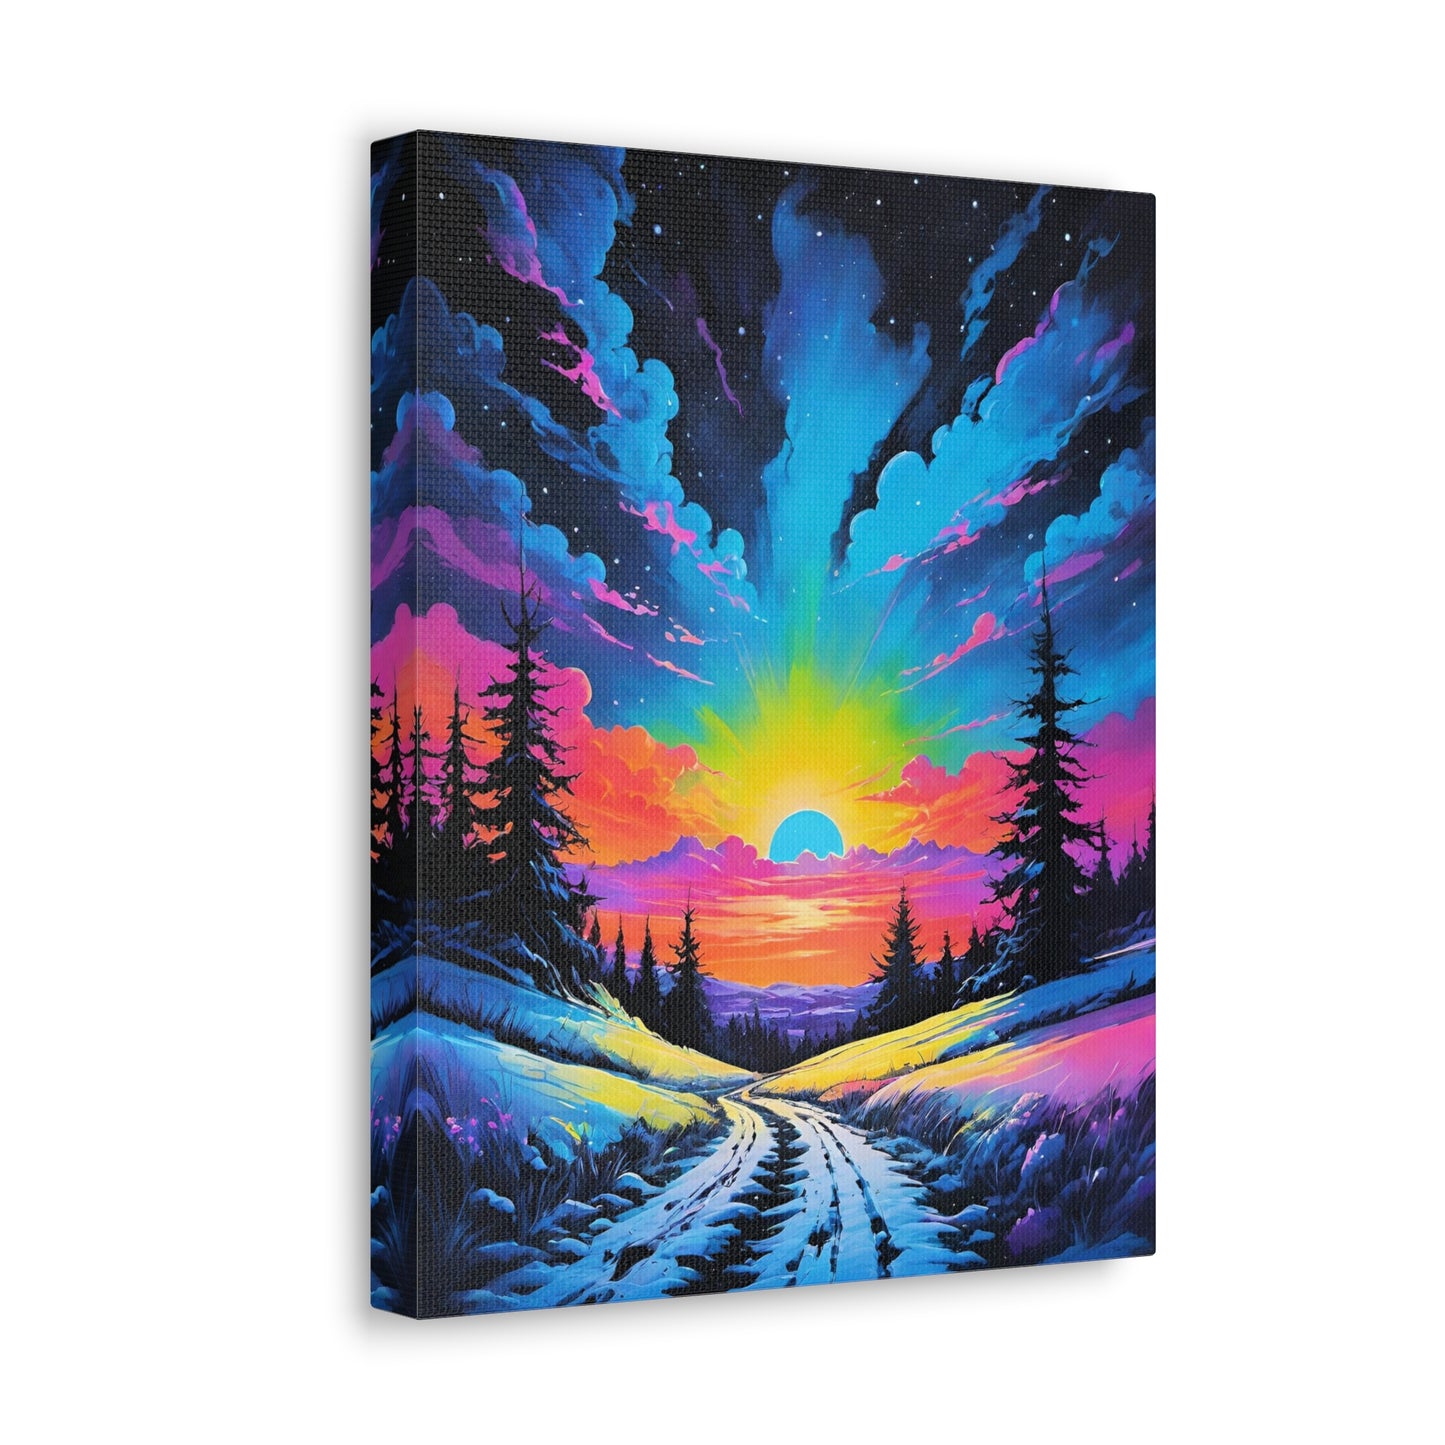 The Sunrise (Canvas Gallery Wraps)